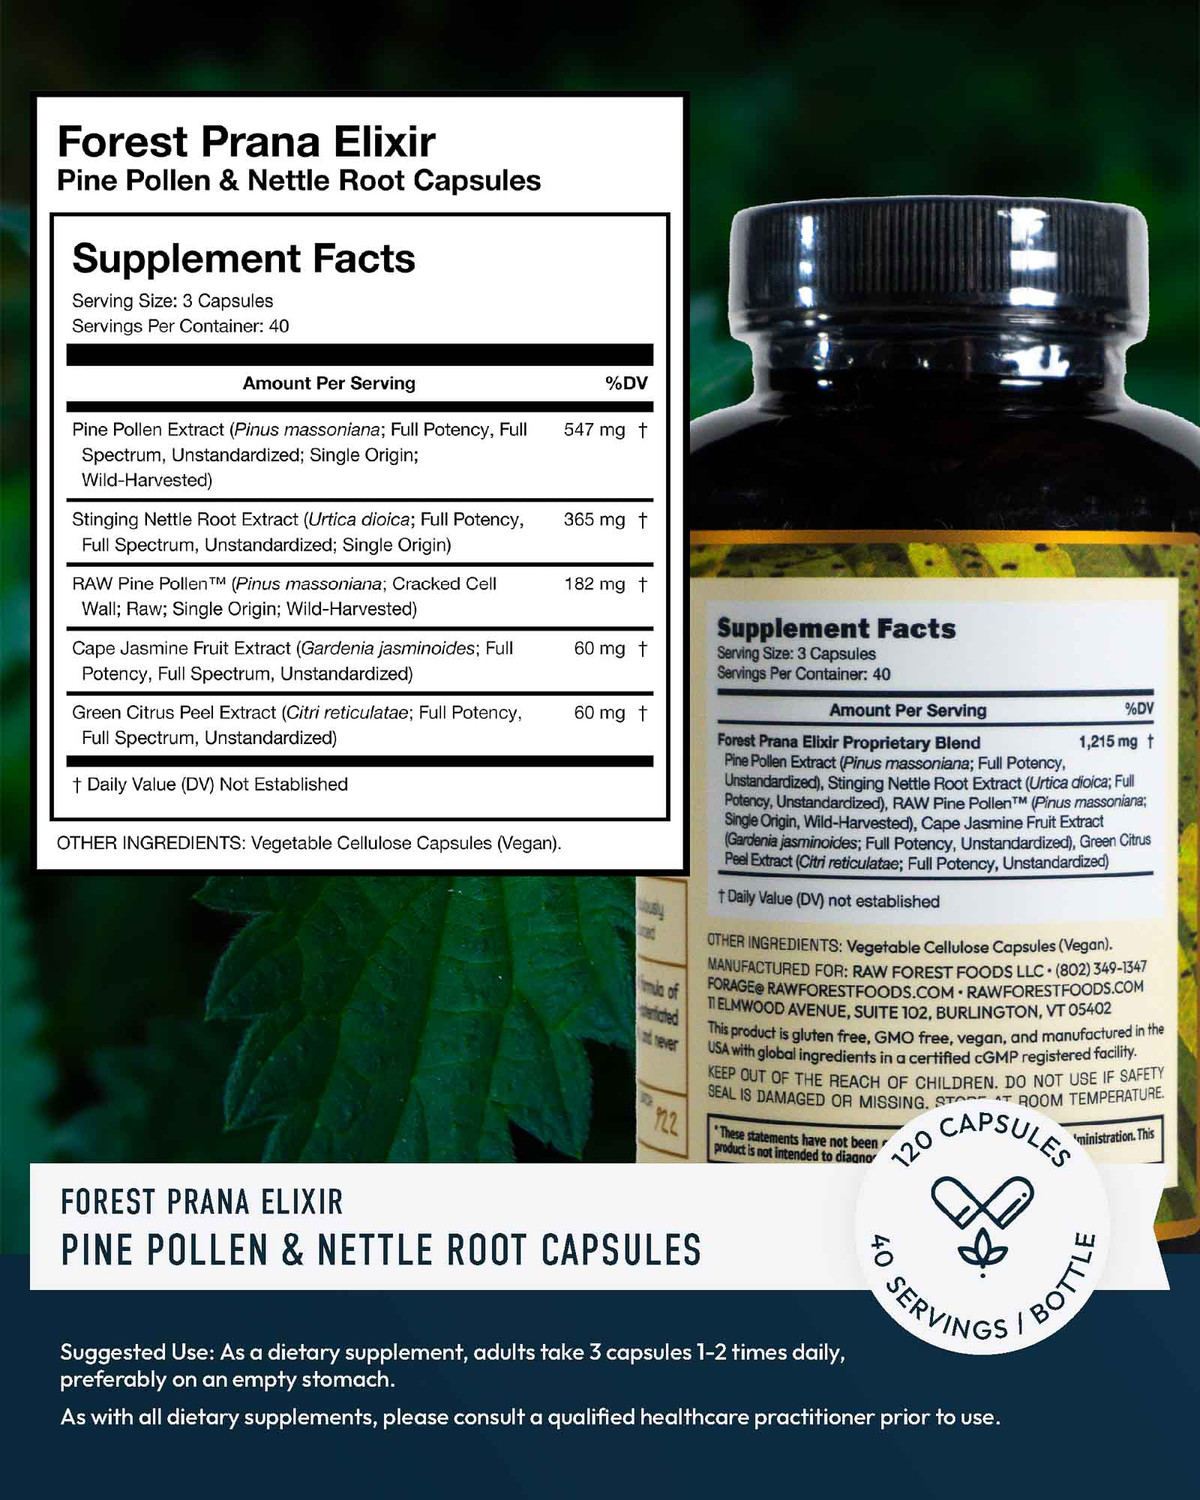 https://cdn11.bigcommerce.com/s-l61qd/images/stencil/1500x1500/products/193/8794/forest-prana-elixir-pine-pollen-and-nettle-root-capsules-120-count-4x5-pc-supplement-facts-card-v1__69117.1670369932.jpg?c=2&imbypass=on